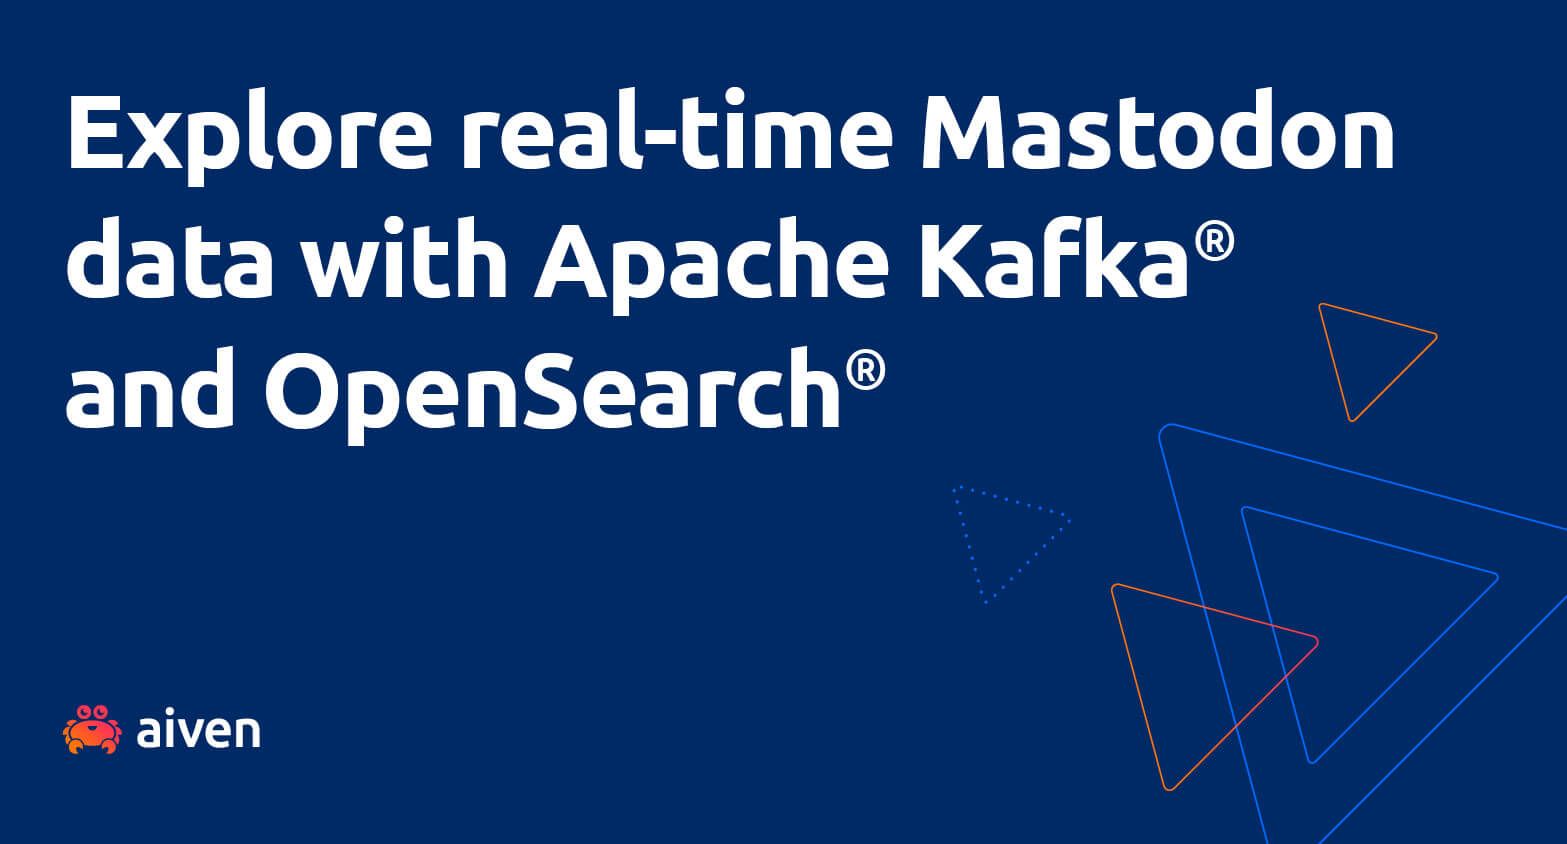 The words "Explore real-time Mastodon data with Apache Kafka® and OpenSearch®", on a blue background, with the Aiven crab logo at the bottom left